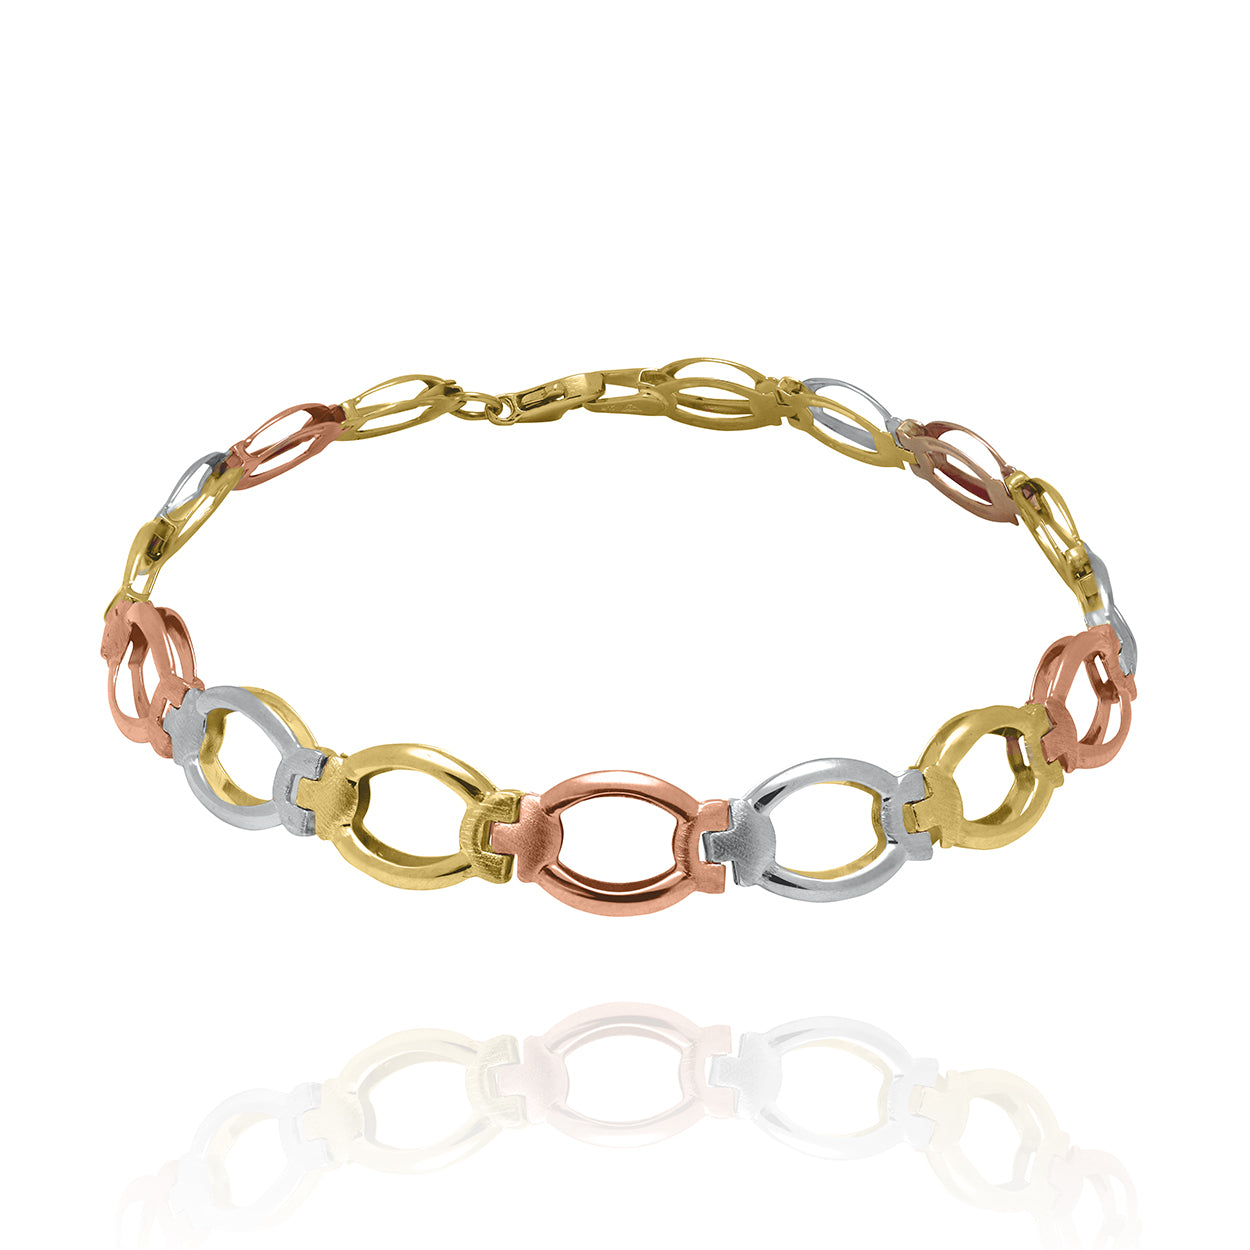 10kt Tri Tone Bracelet with Oval Links featuring Satin Finish